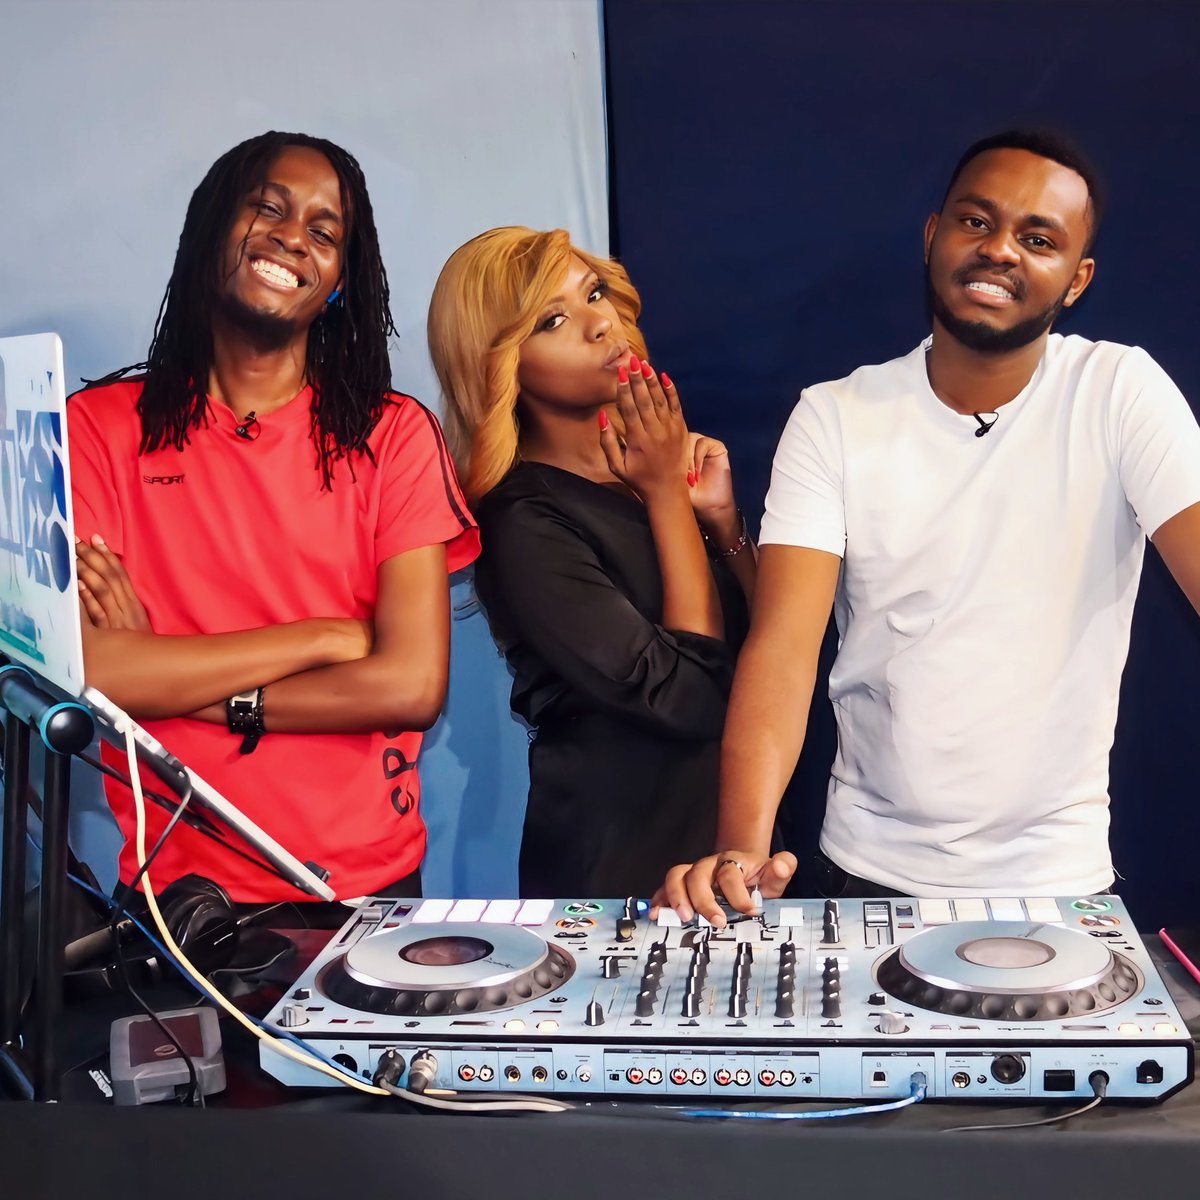 It's Open Hour time introducing @Rixterdj 🎵 Where are you watching from & what do you wanna watch? #SocialFriday @masaikta @ColourmeVal @DeejayRajyz